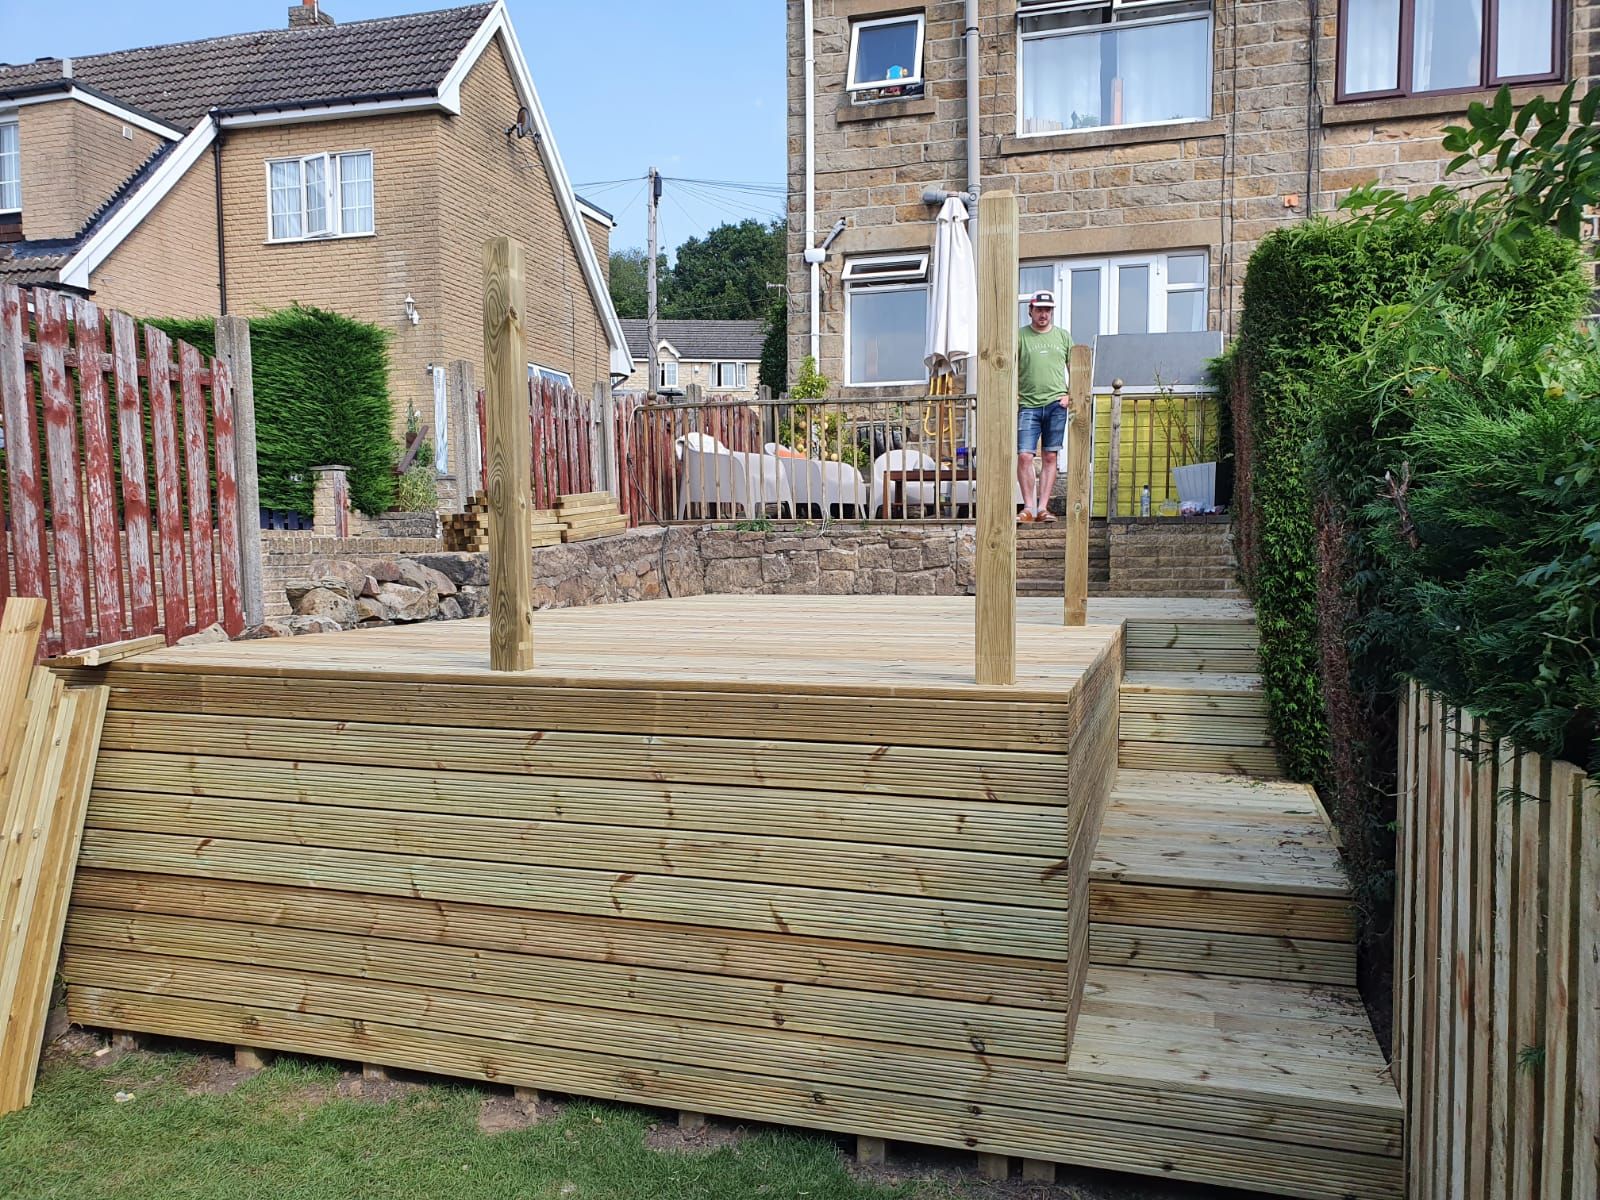 Raised wooden decking being constructed in a Dinas Powys back garden